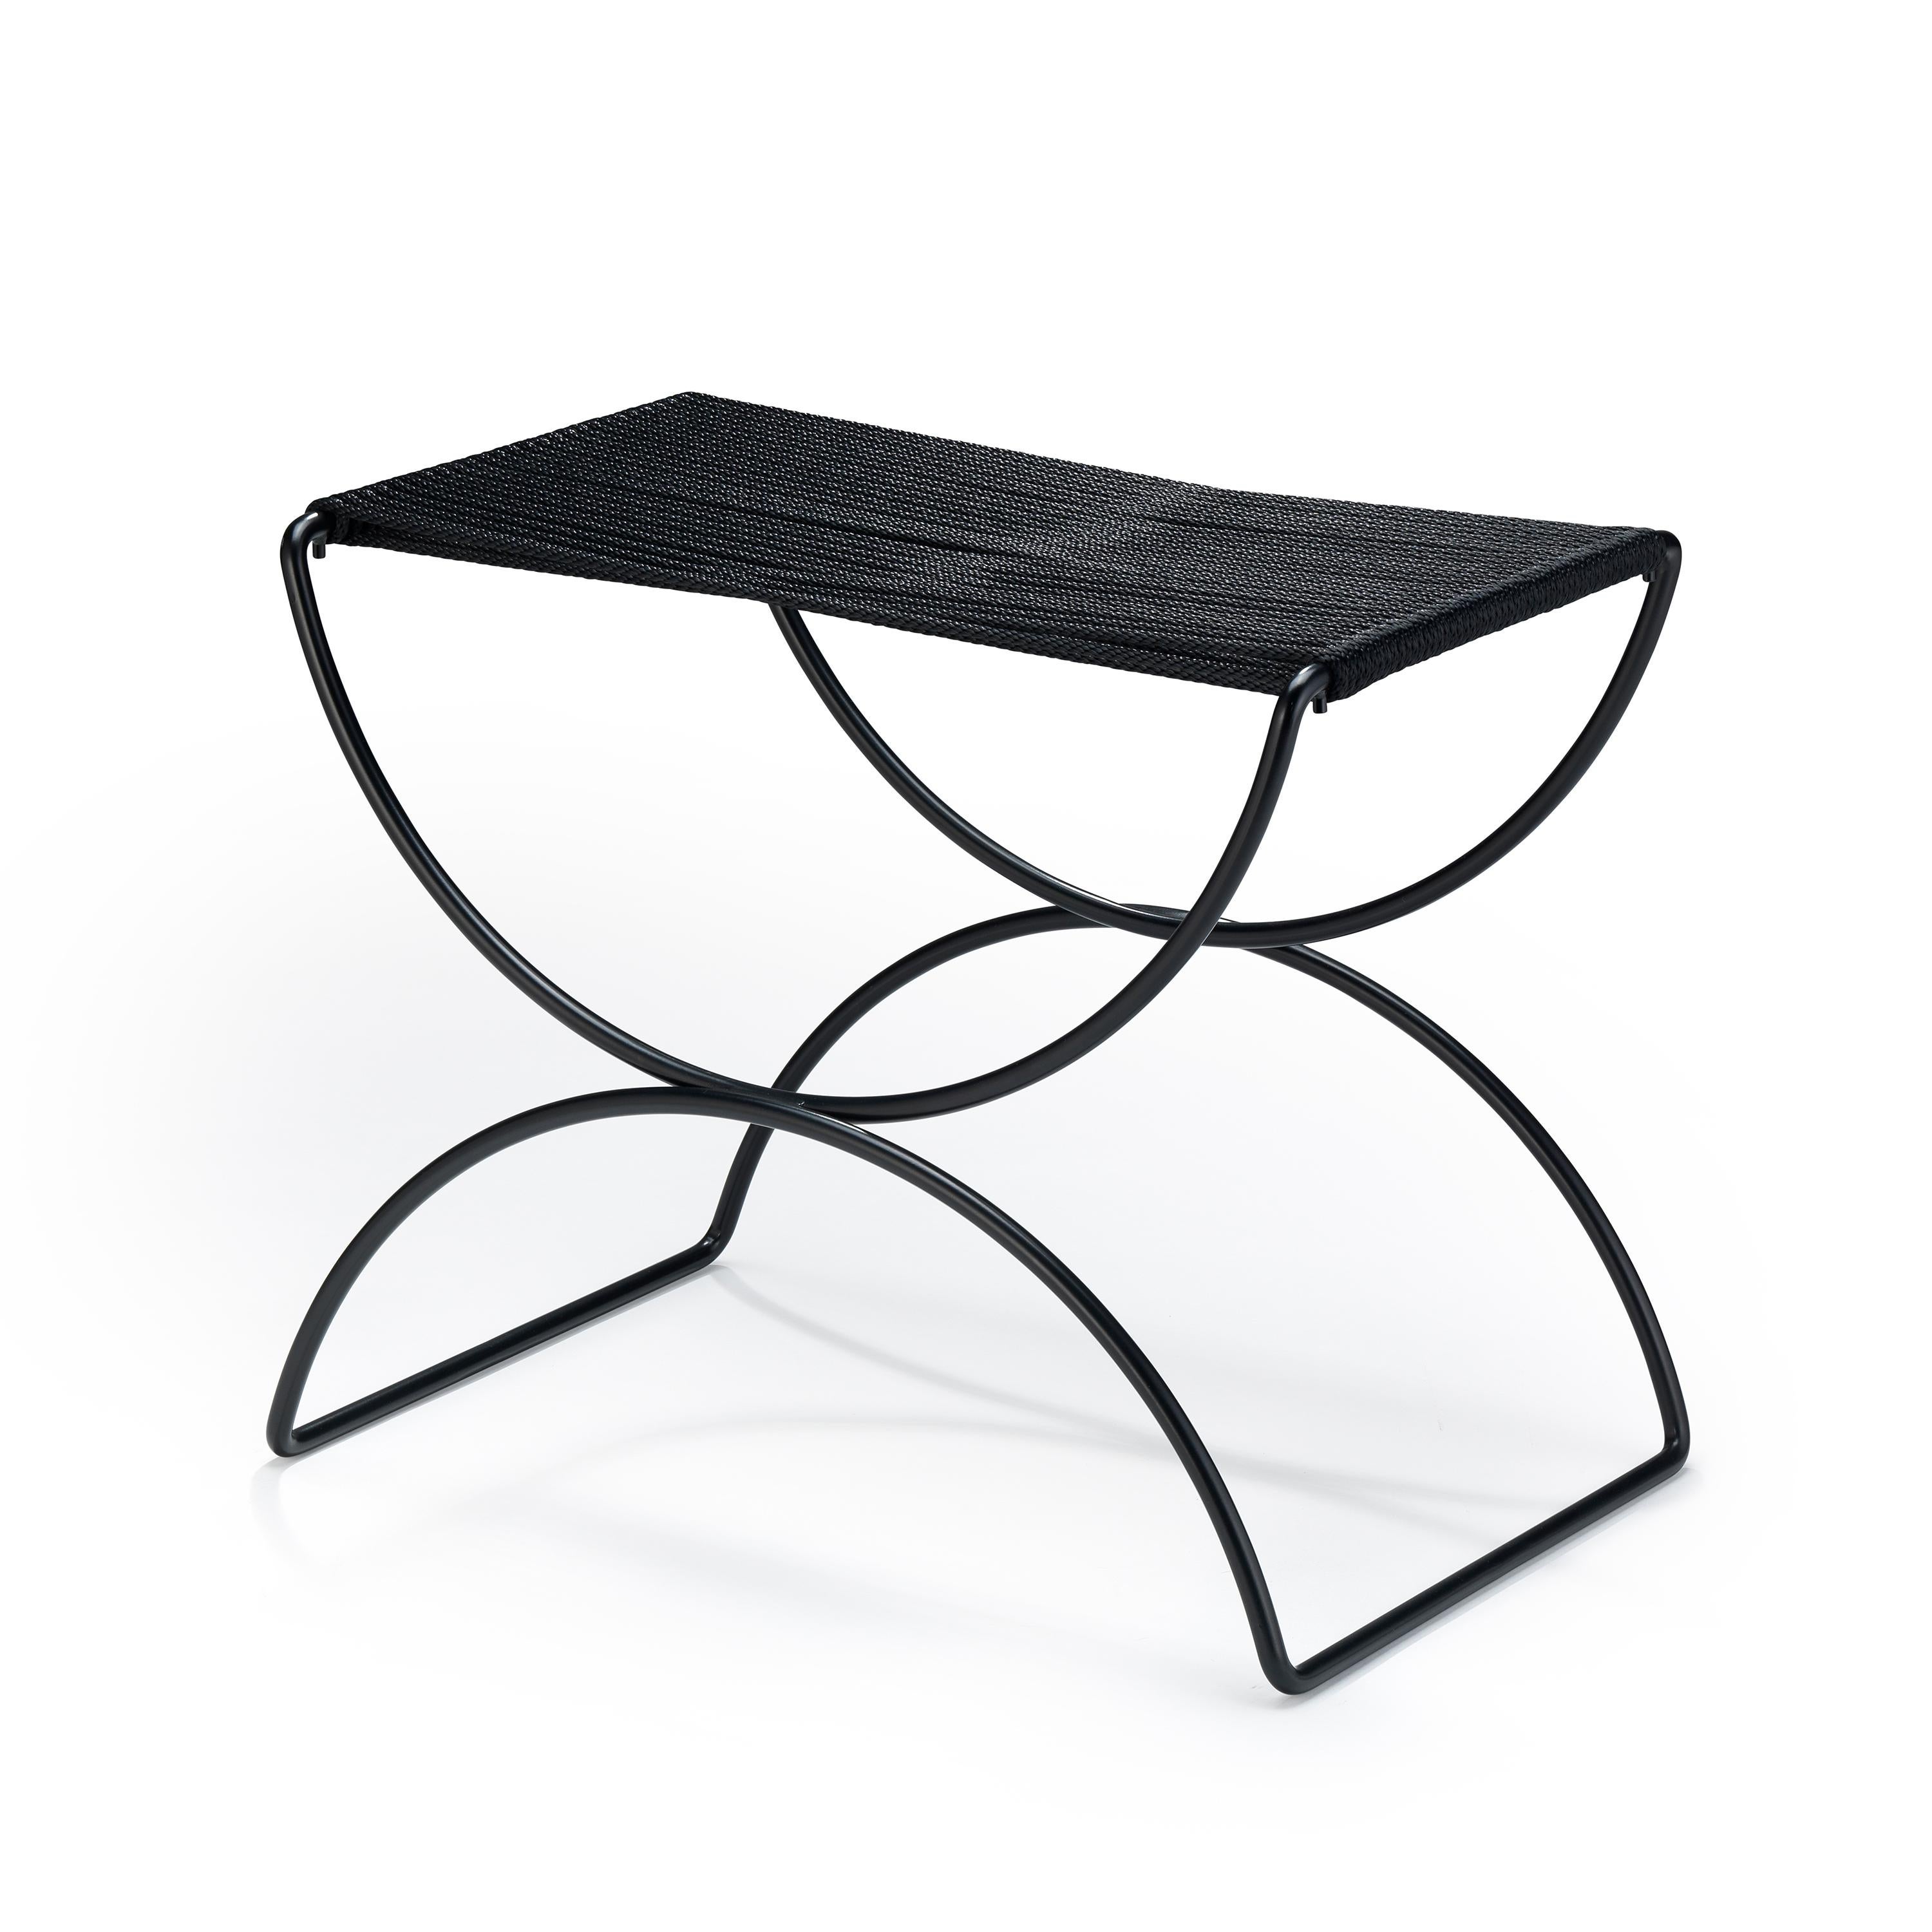 Ten10 Pompeii style seat with a standard steel base powder coated semi-gloss black and a nylon cord seat in black or white. Suitable for indoor or outdoor use.